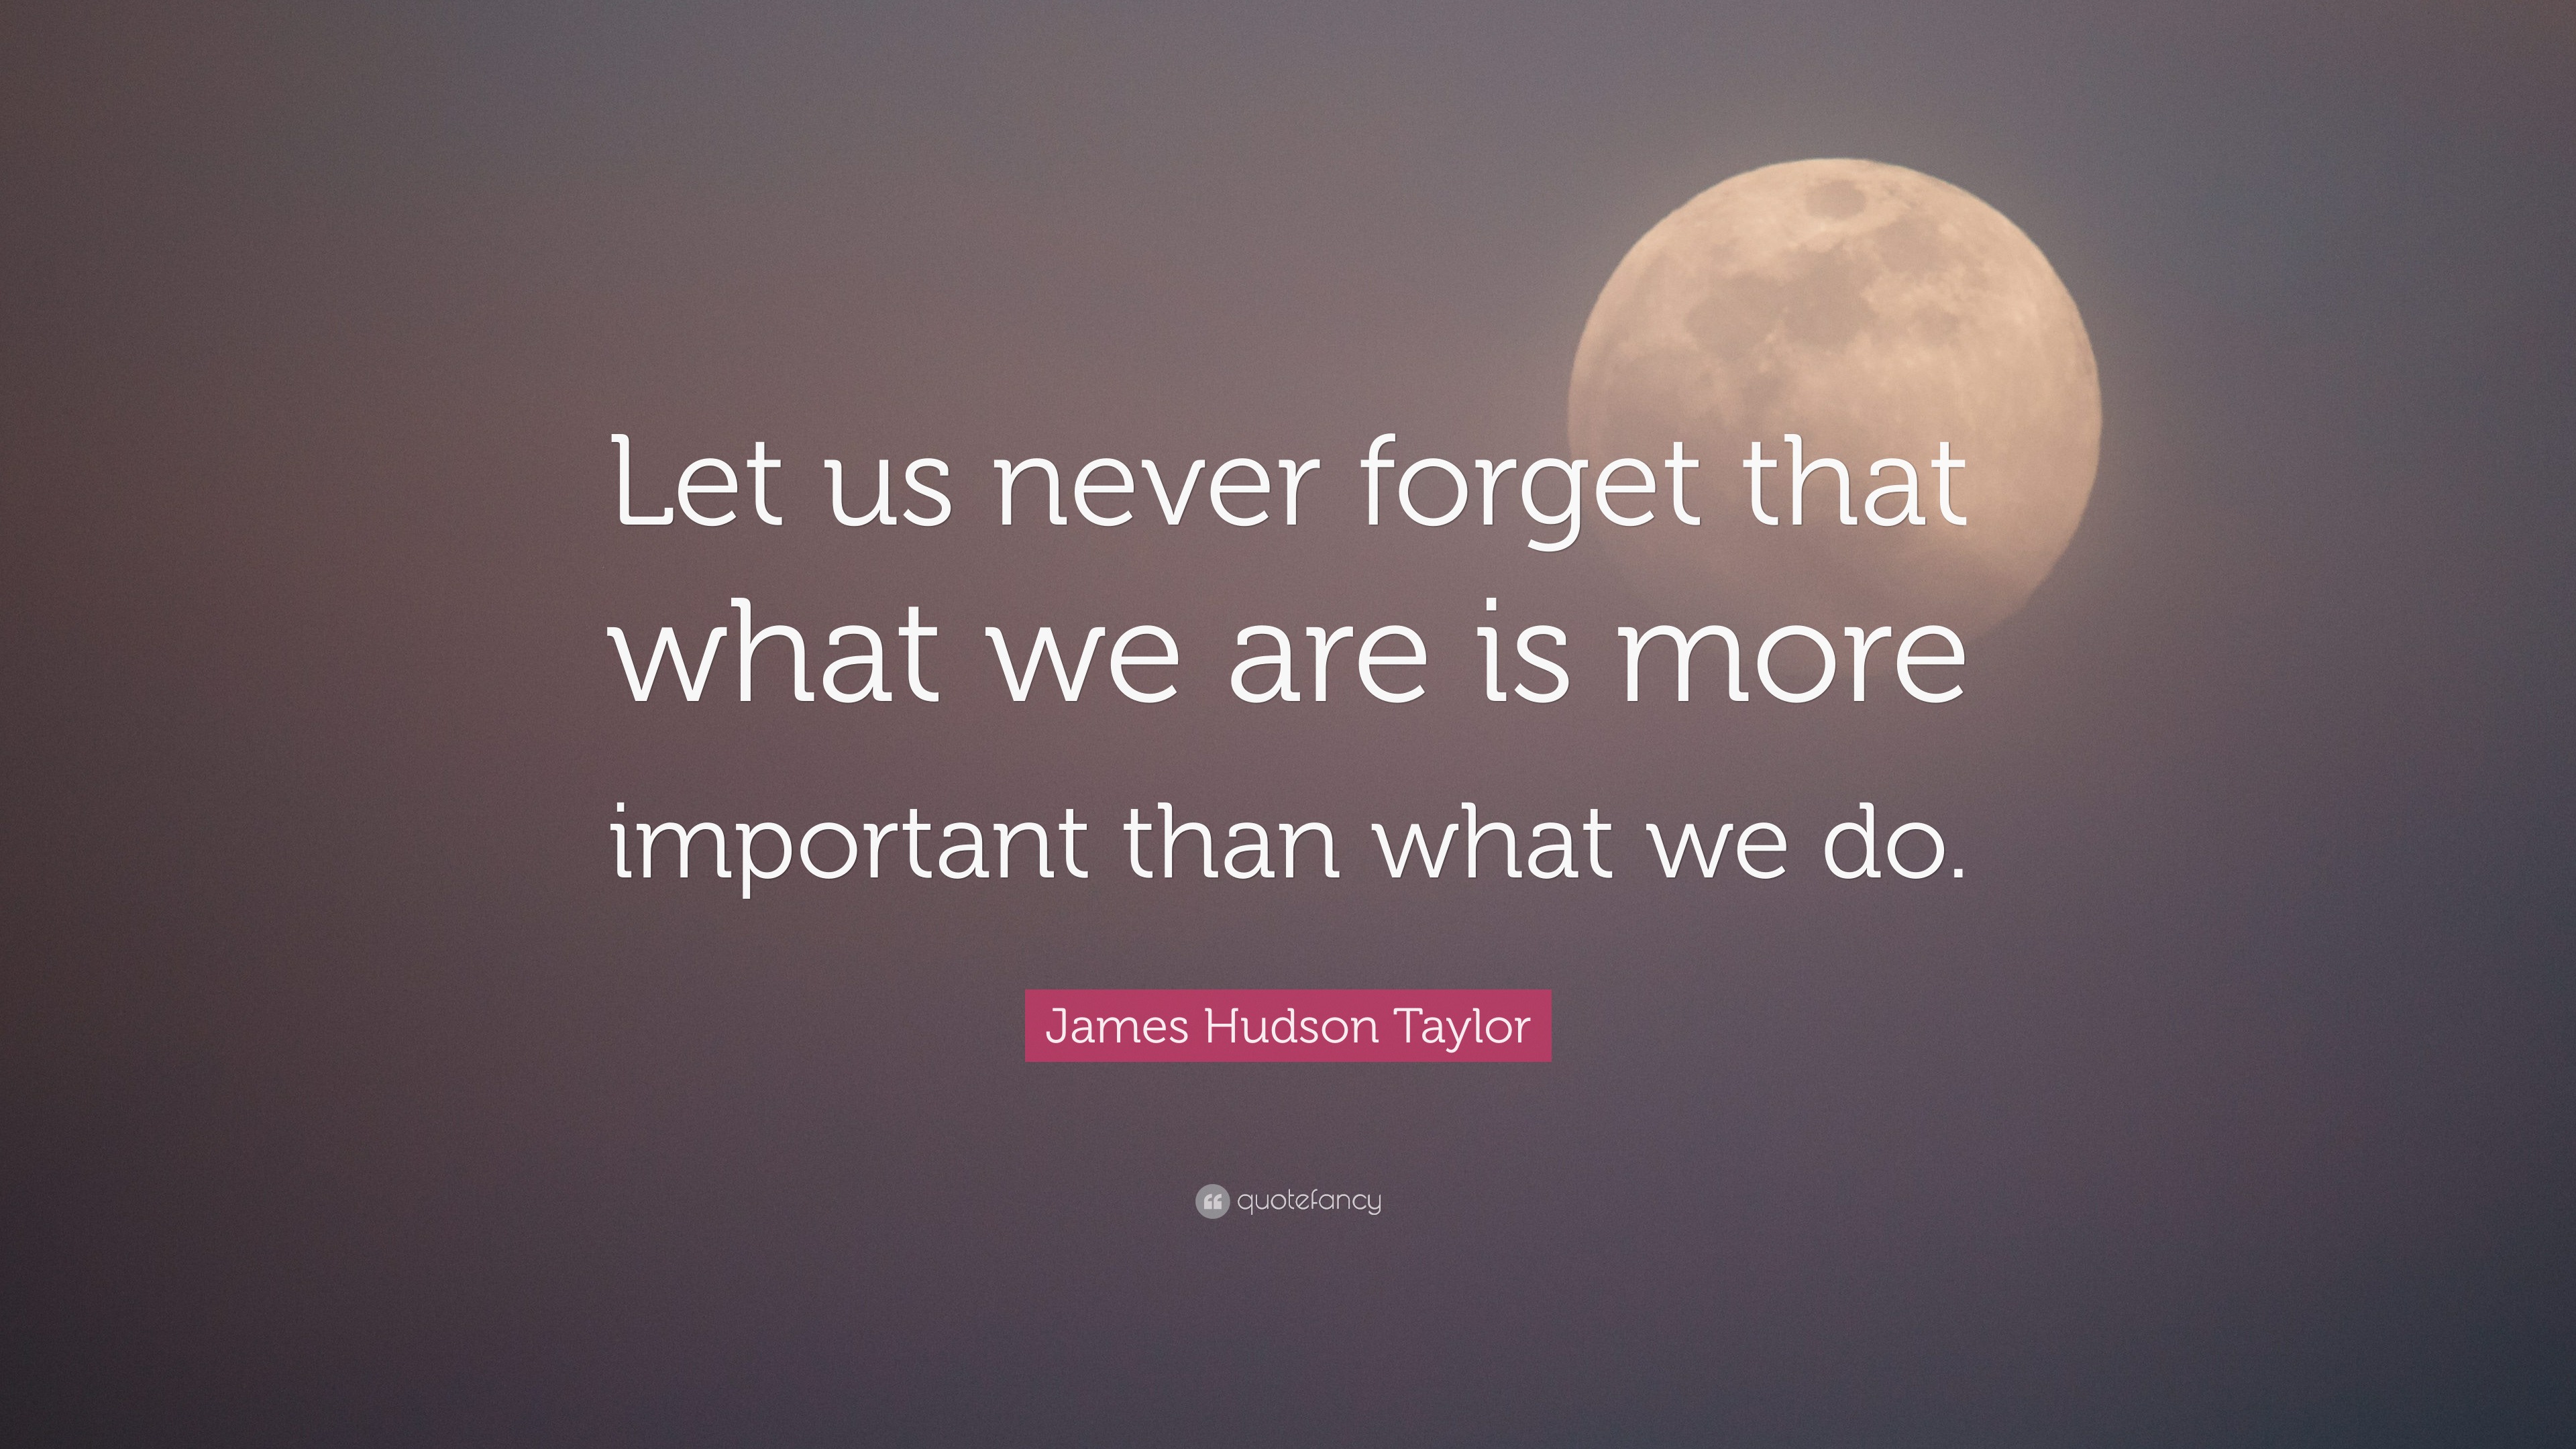 James Hudson Taylor Quote: “Let us never forget that what we are is ...